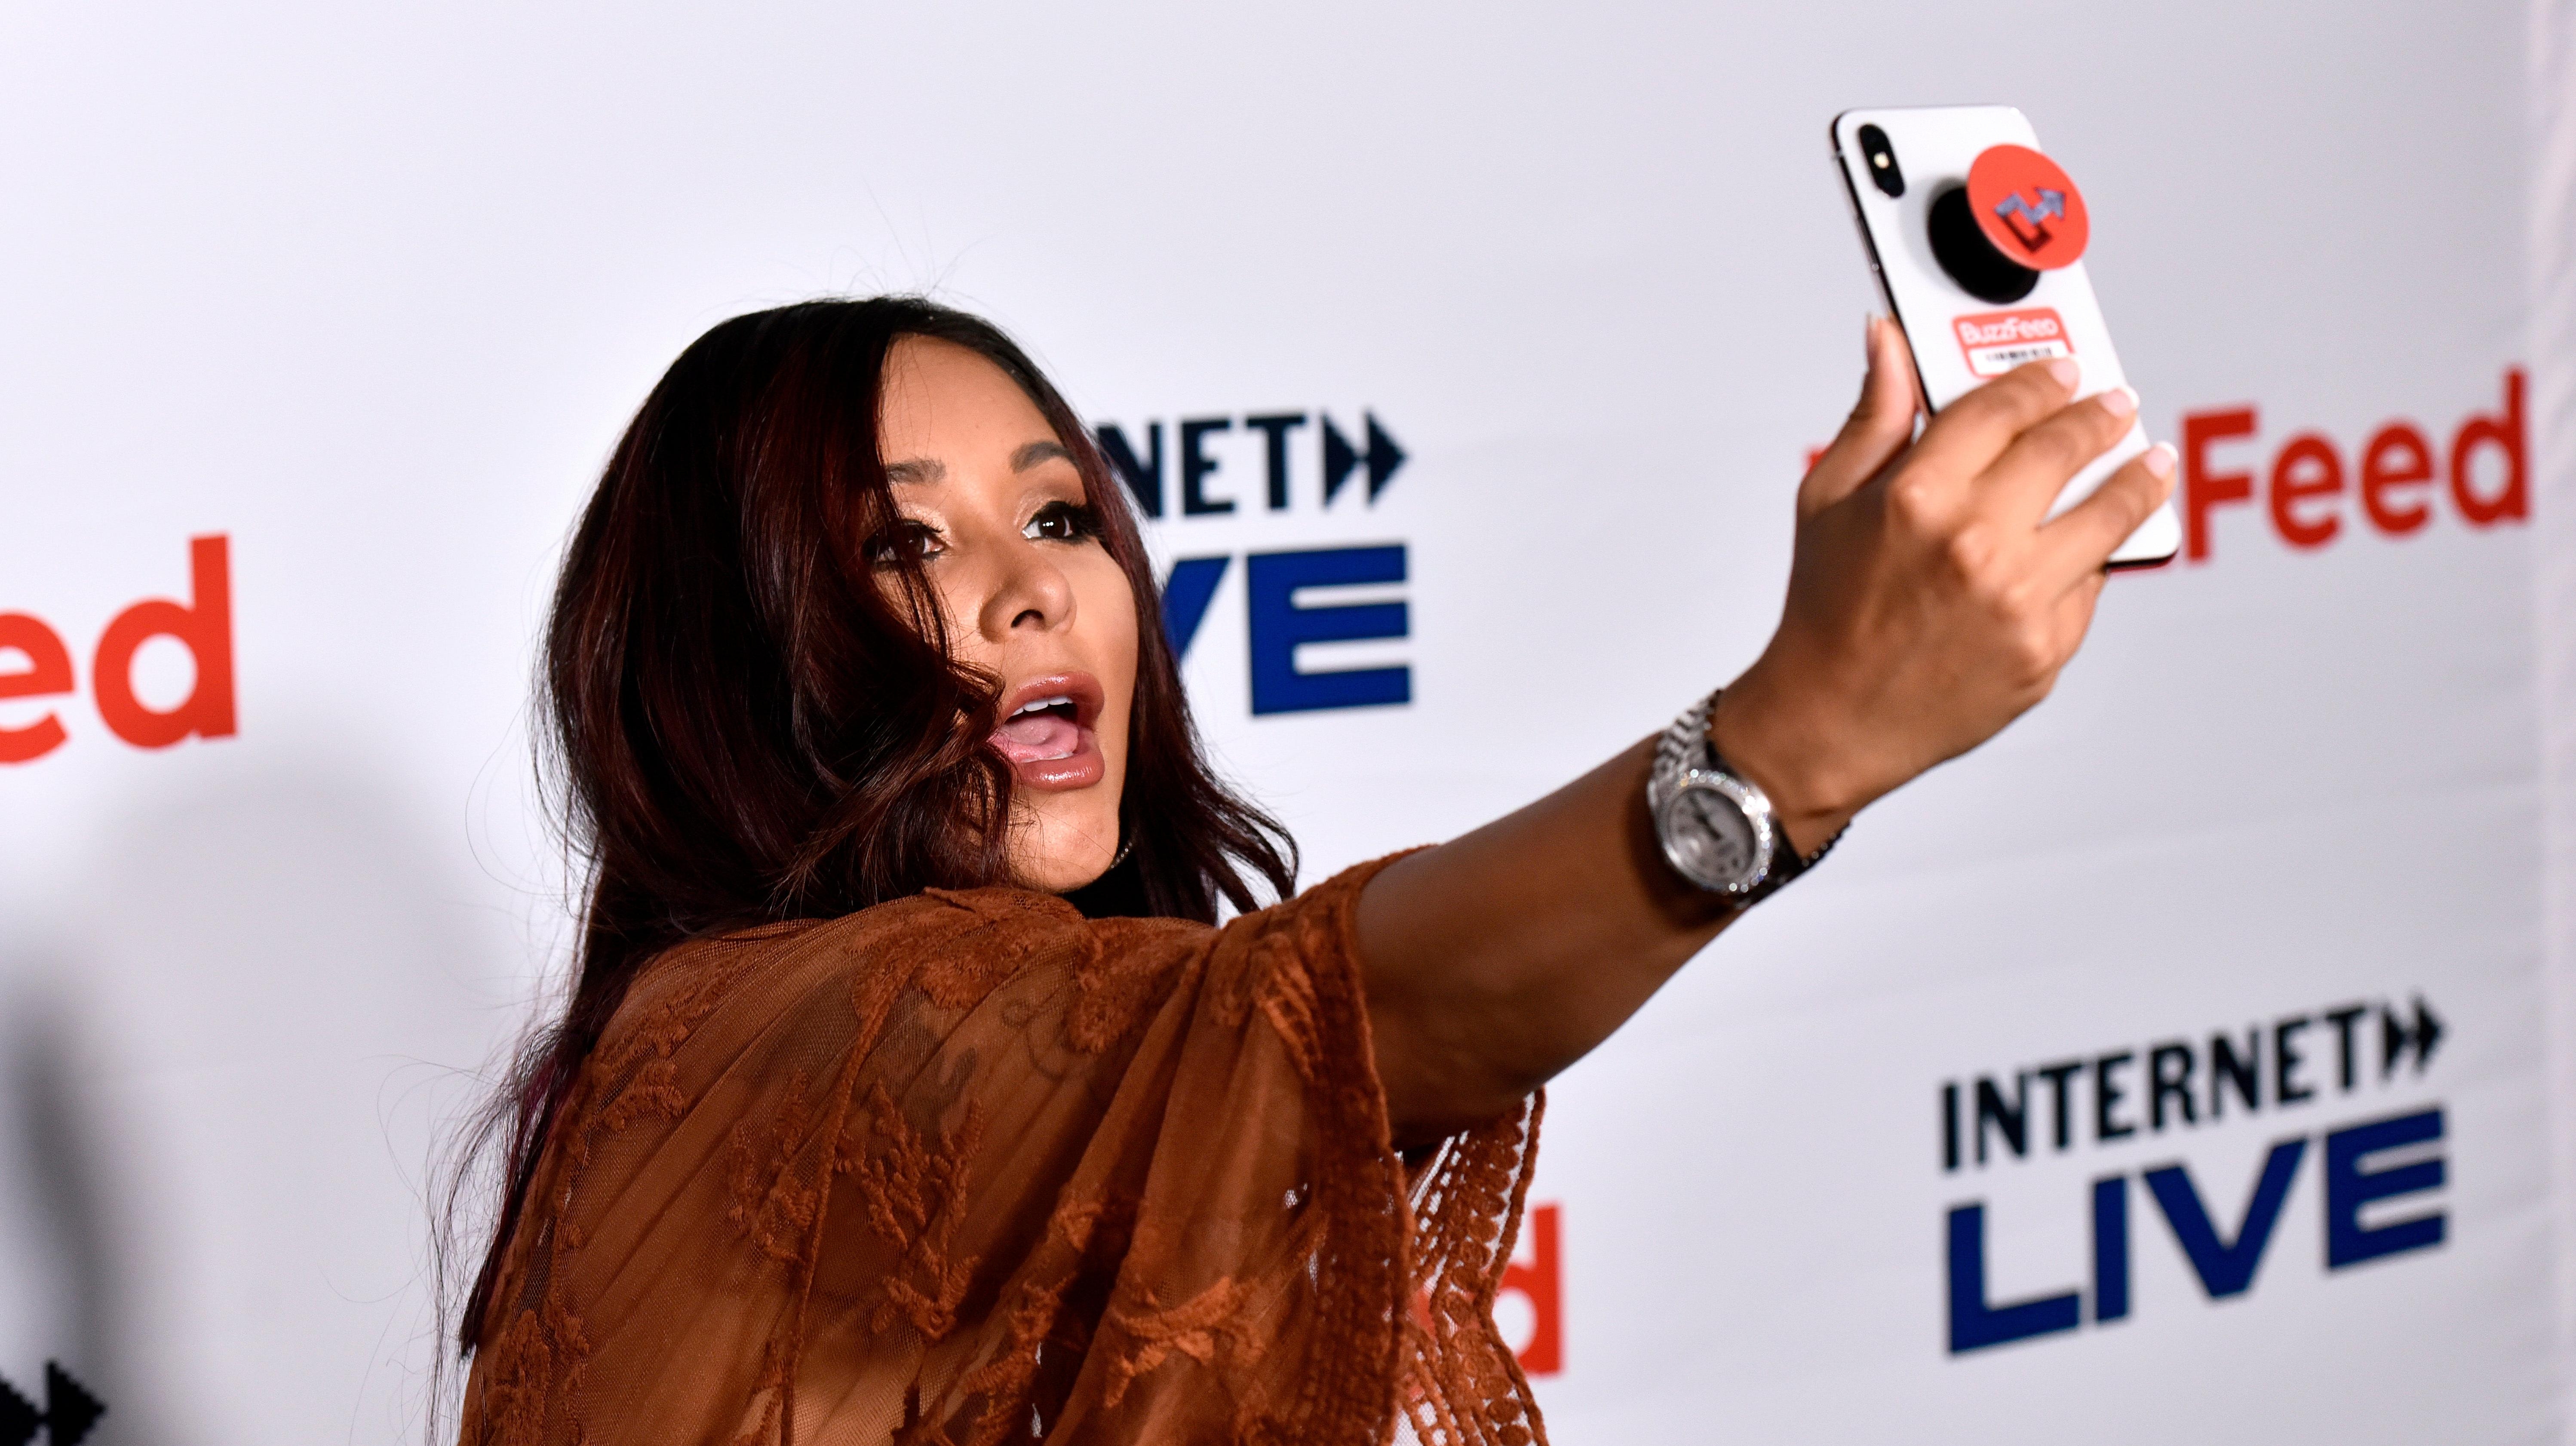 Snooki's getting her own Ridiculousness spin-off to overload MTV's schedule with